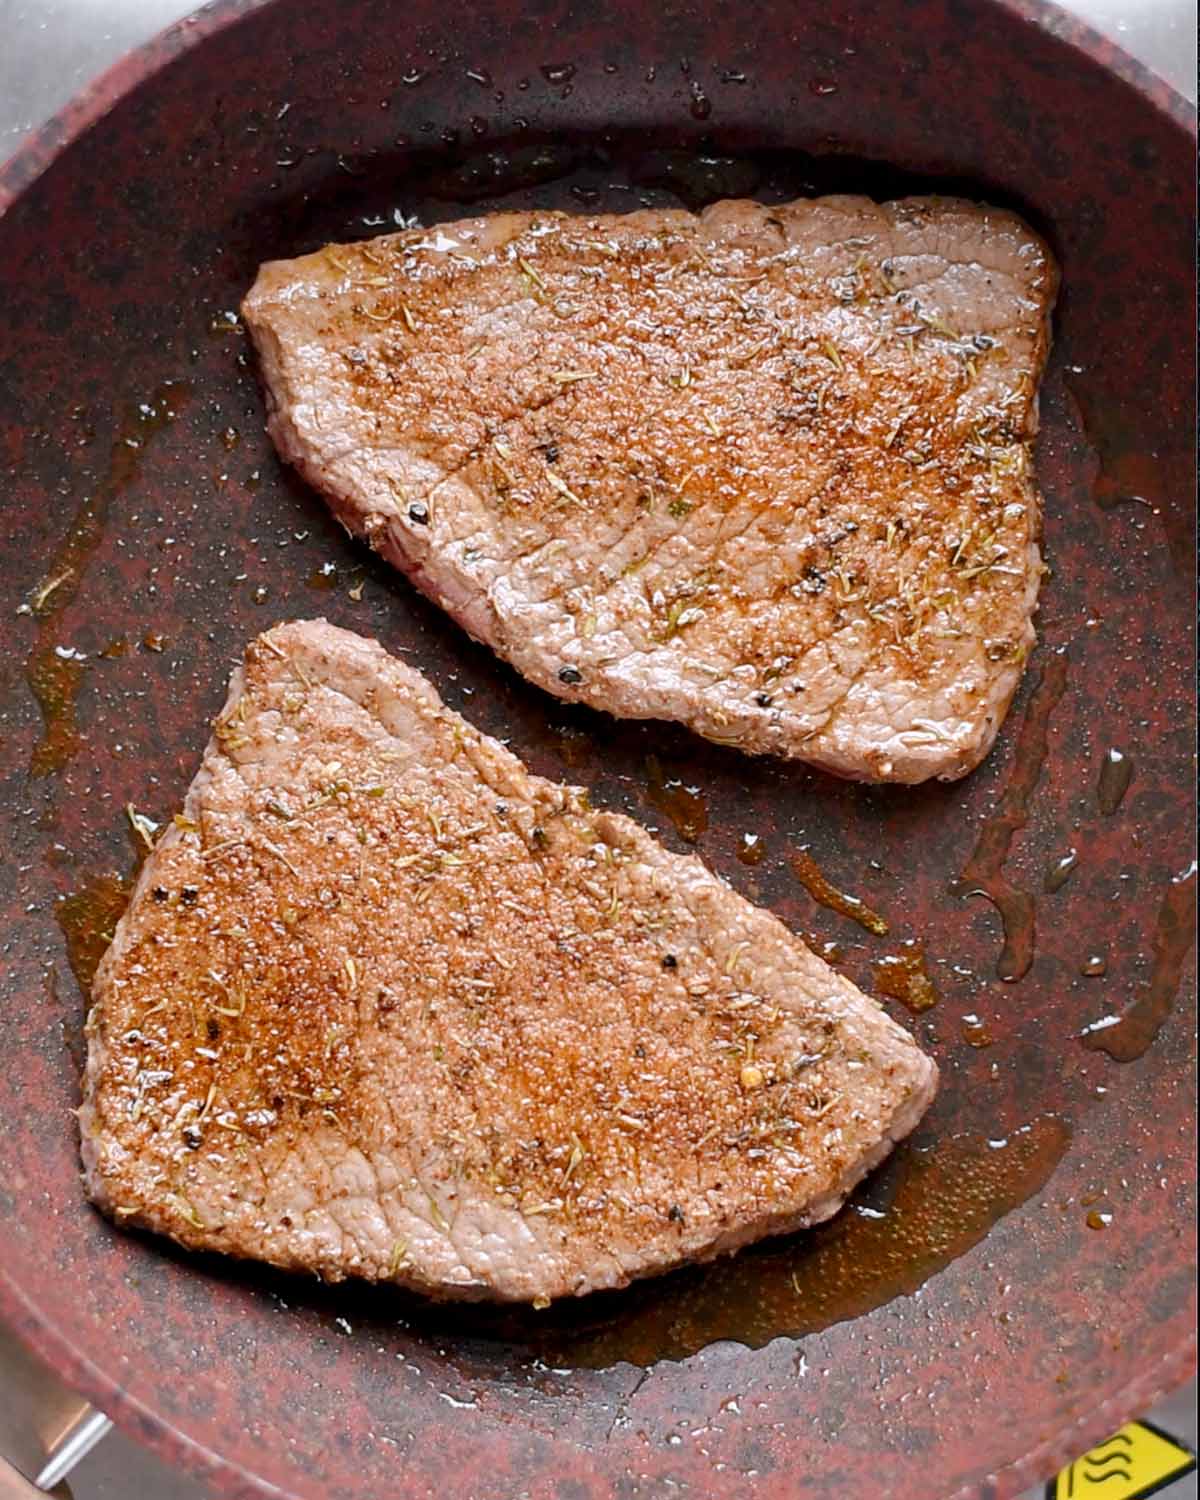 Two pieces of steak cooking in a frying pan.